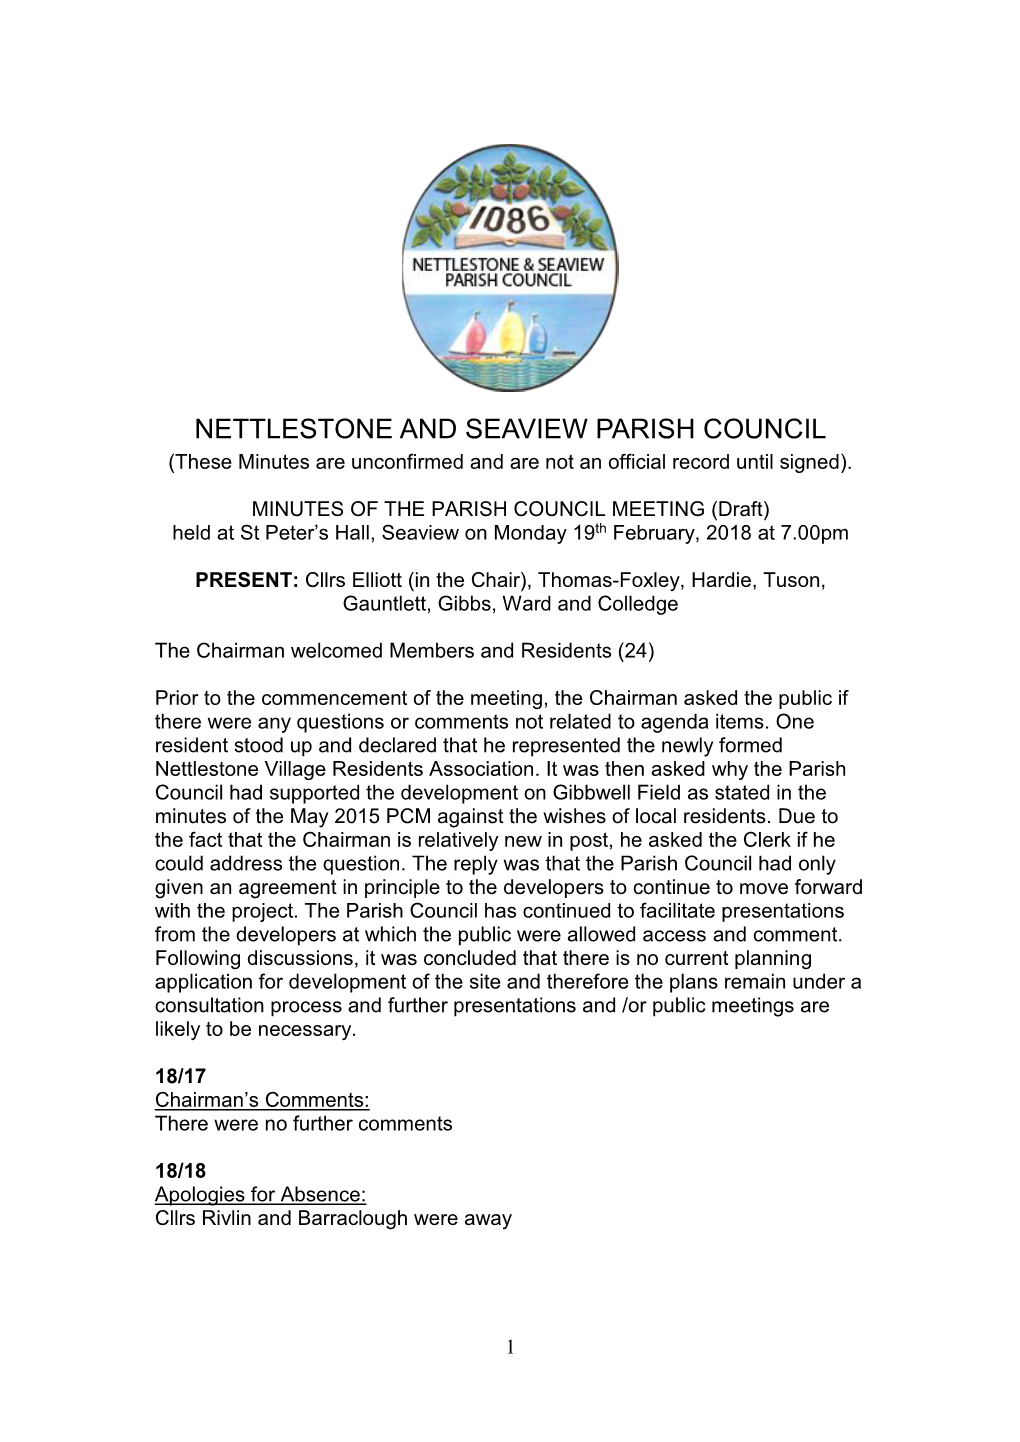 NETTLESTONE and SEAVIEW PARISH COUNCIL (These Minutes Are Unconfirmed and Are Not an Official Record Until Signed)